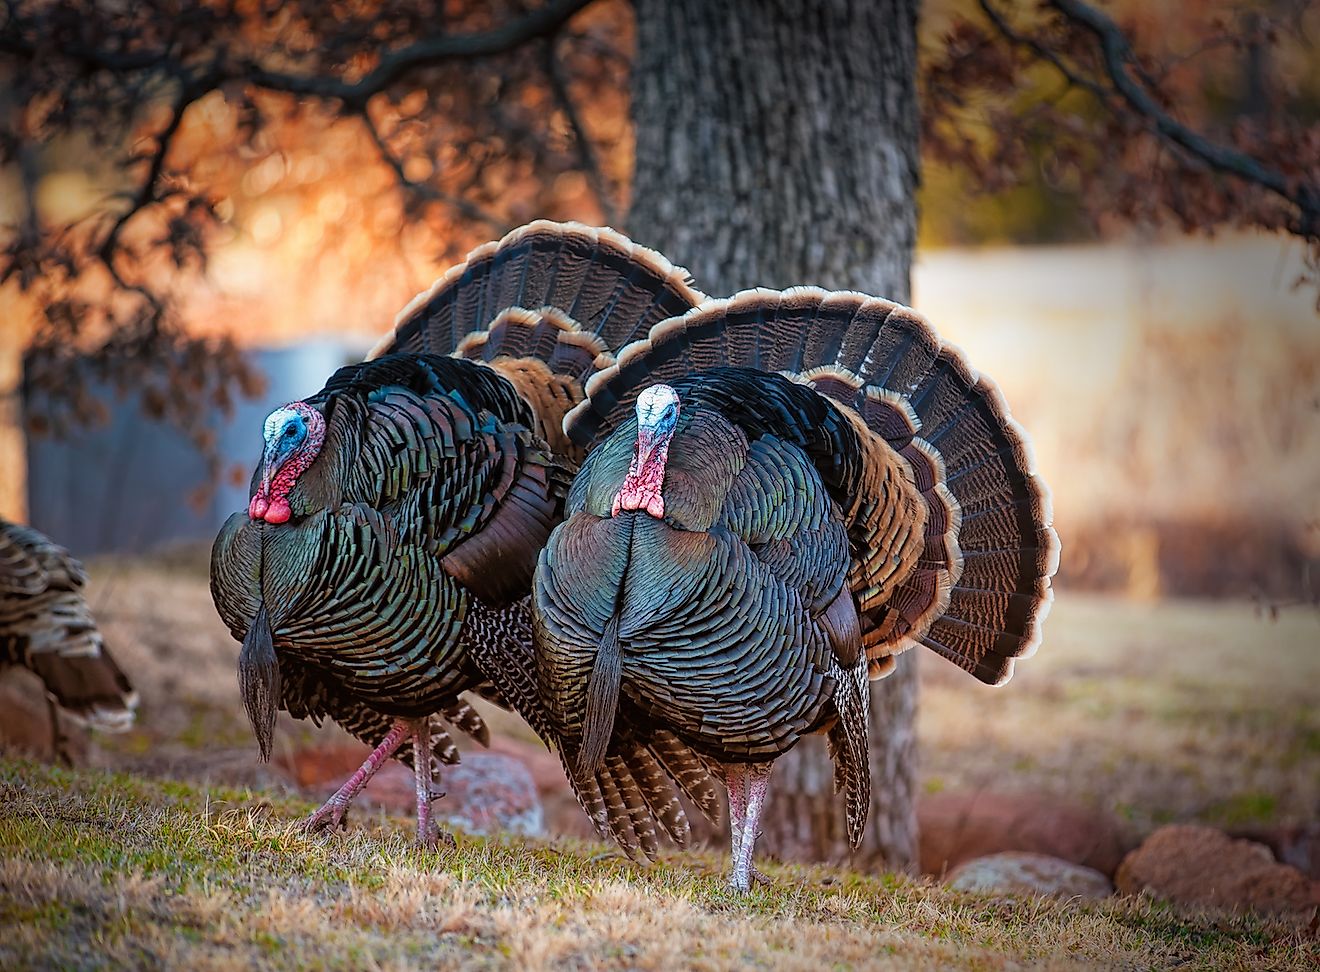 Two male turkeys strutting on grassy meadow with full feather displayed. Image credit: David Scott Dodd/Shutterstock.com